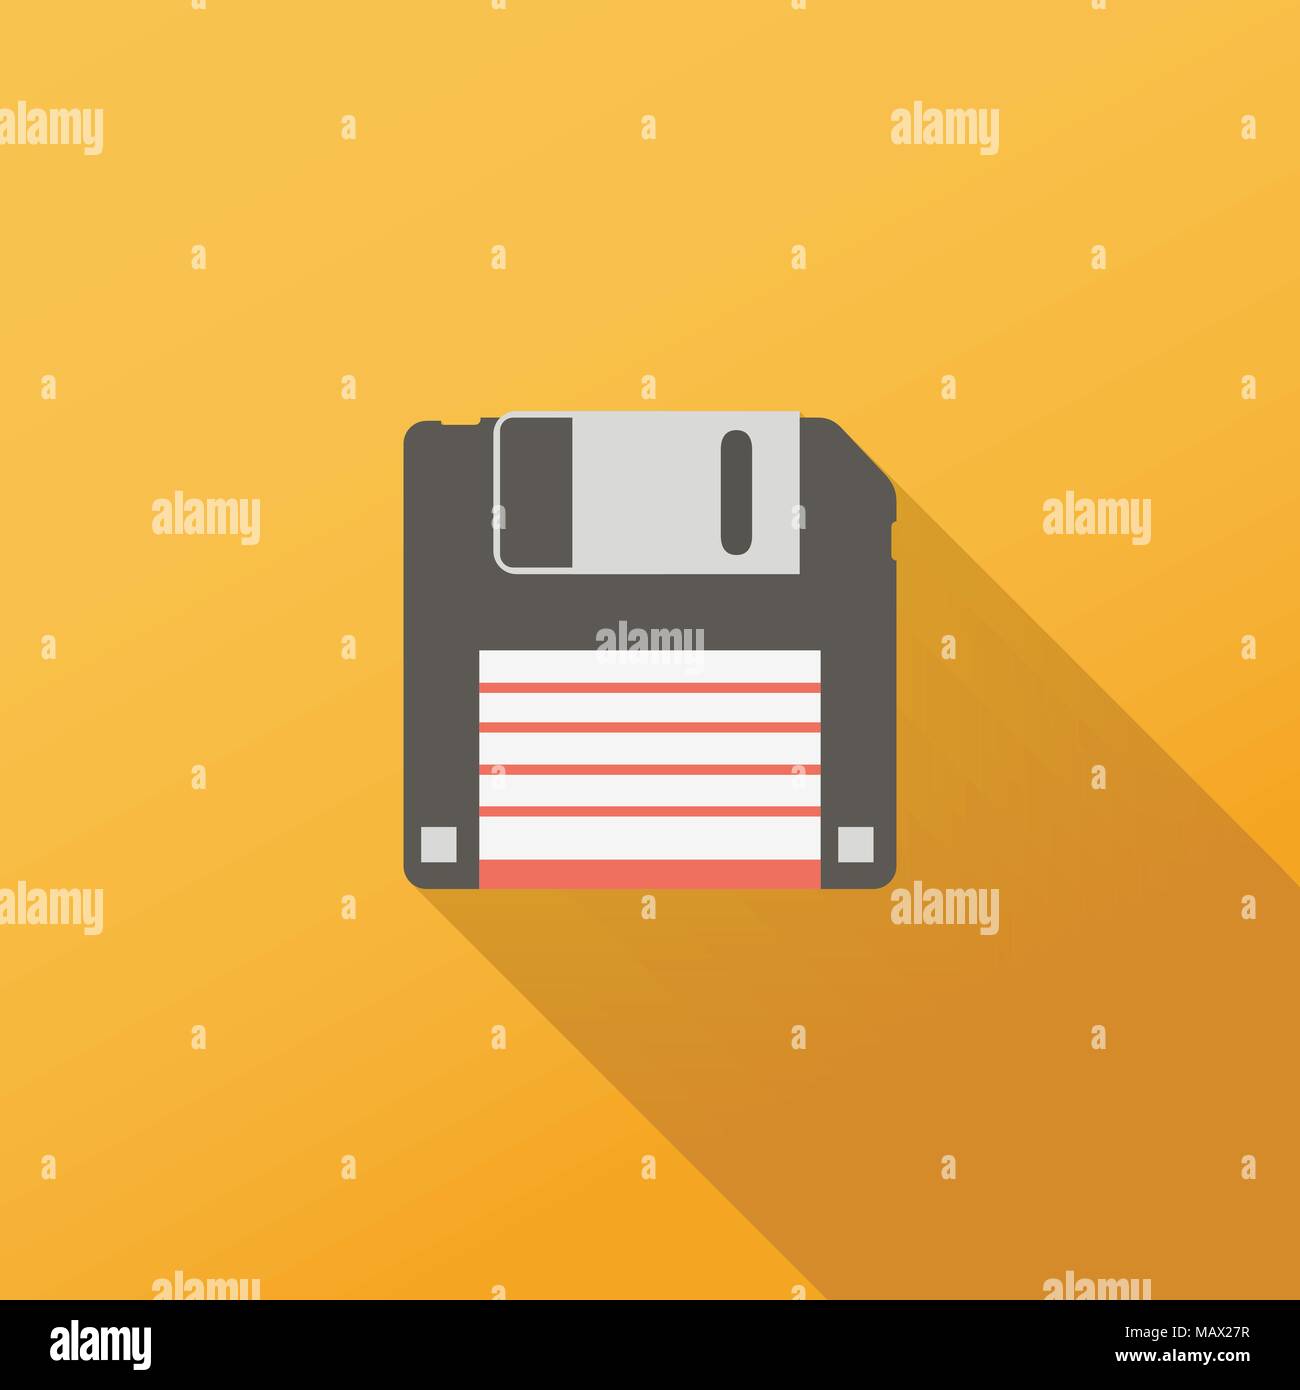 Floppy disk icon with long shadow Stock Vector